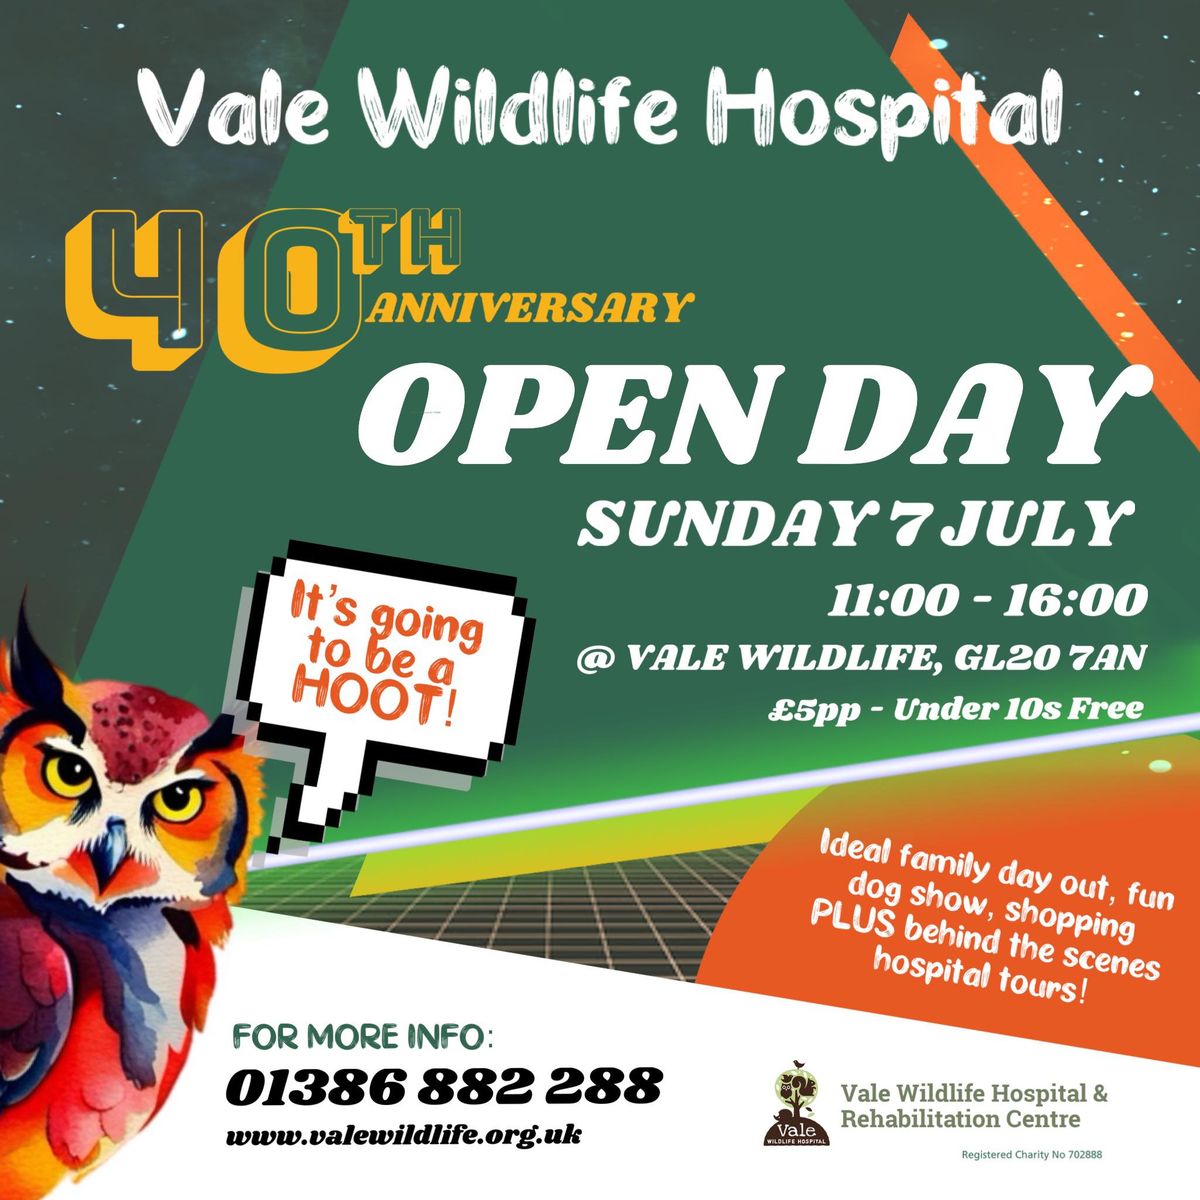 Vale Wildlife Hospital's 40th Anniversary Open Day & Fun Dog Show